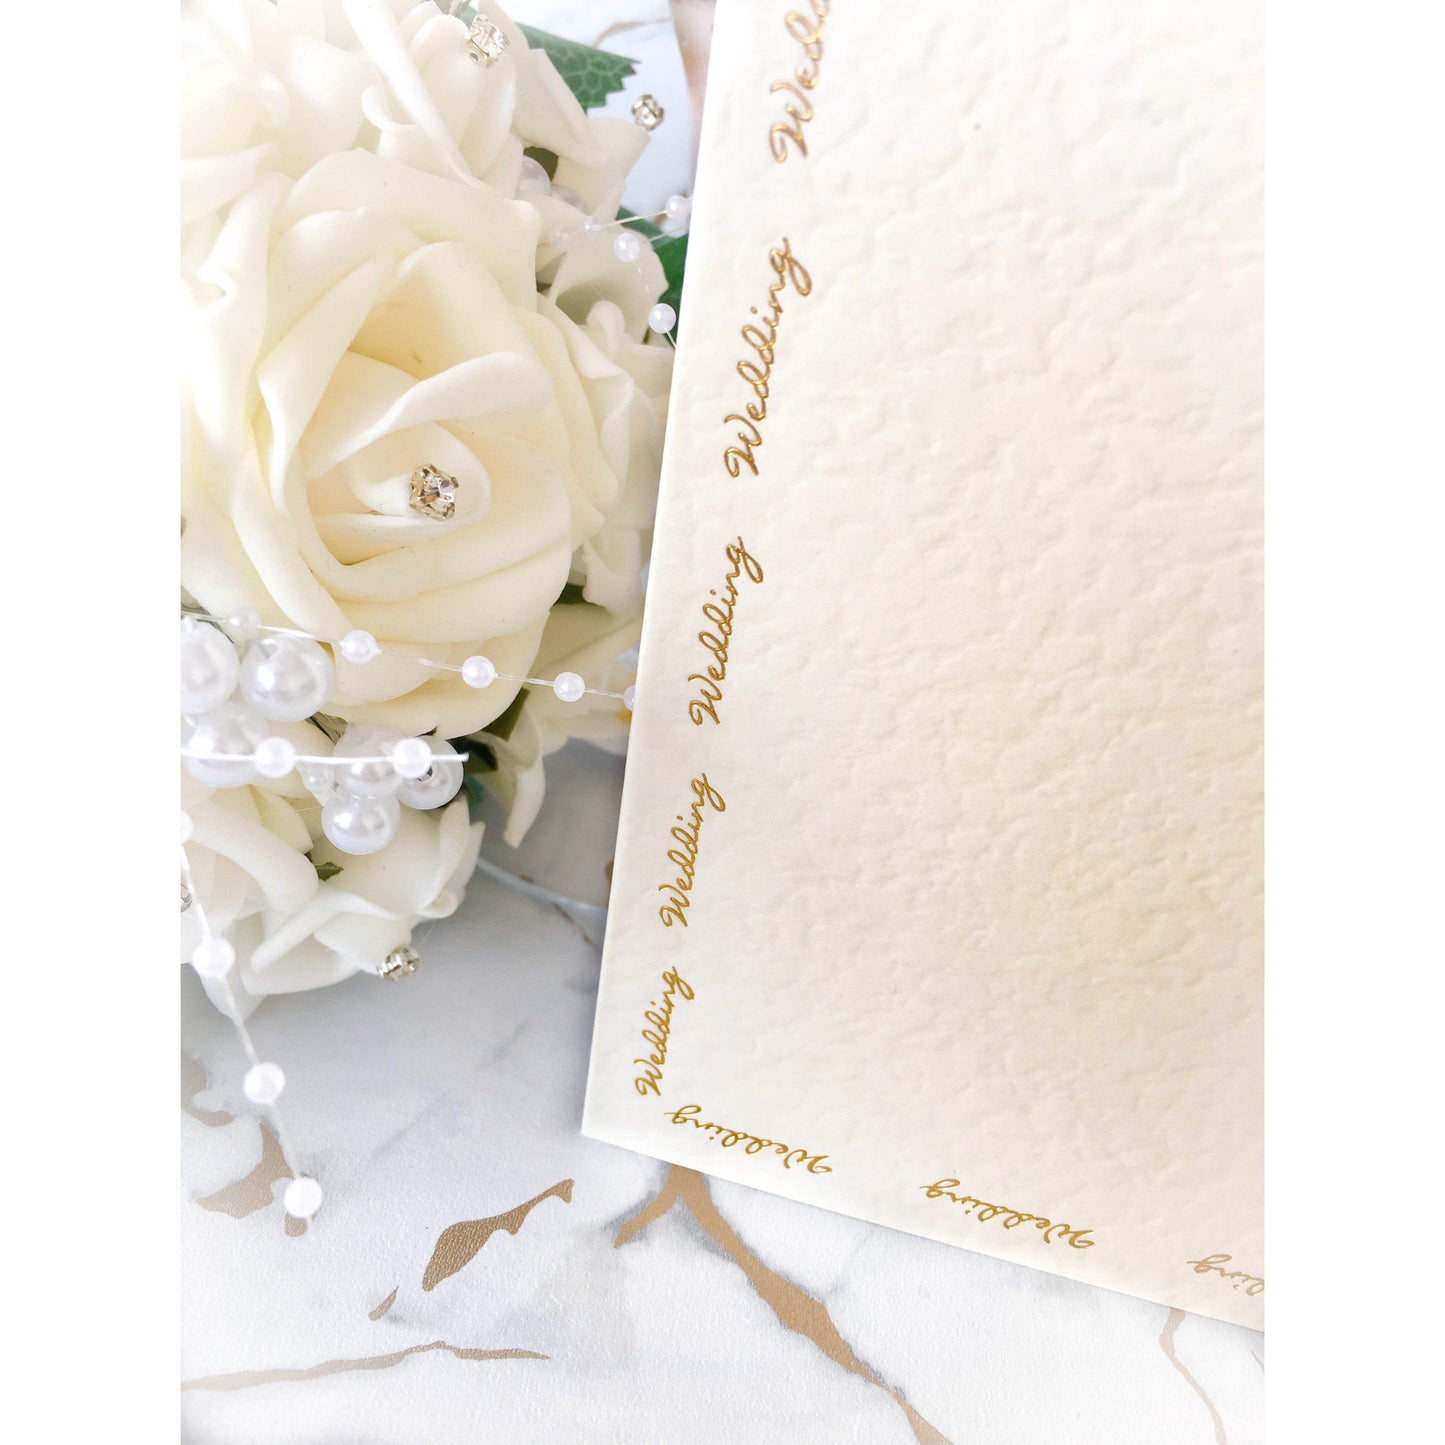 A5 Card Blanks Ivory Hammer Effect With Gold Foil Wedding Script 10pk Pre-Folded - Clearance-The Creative Bride